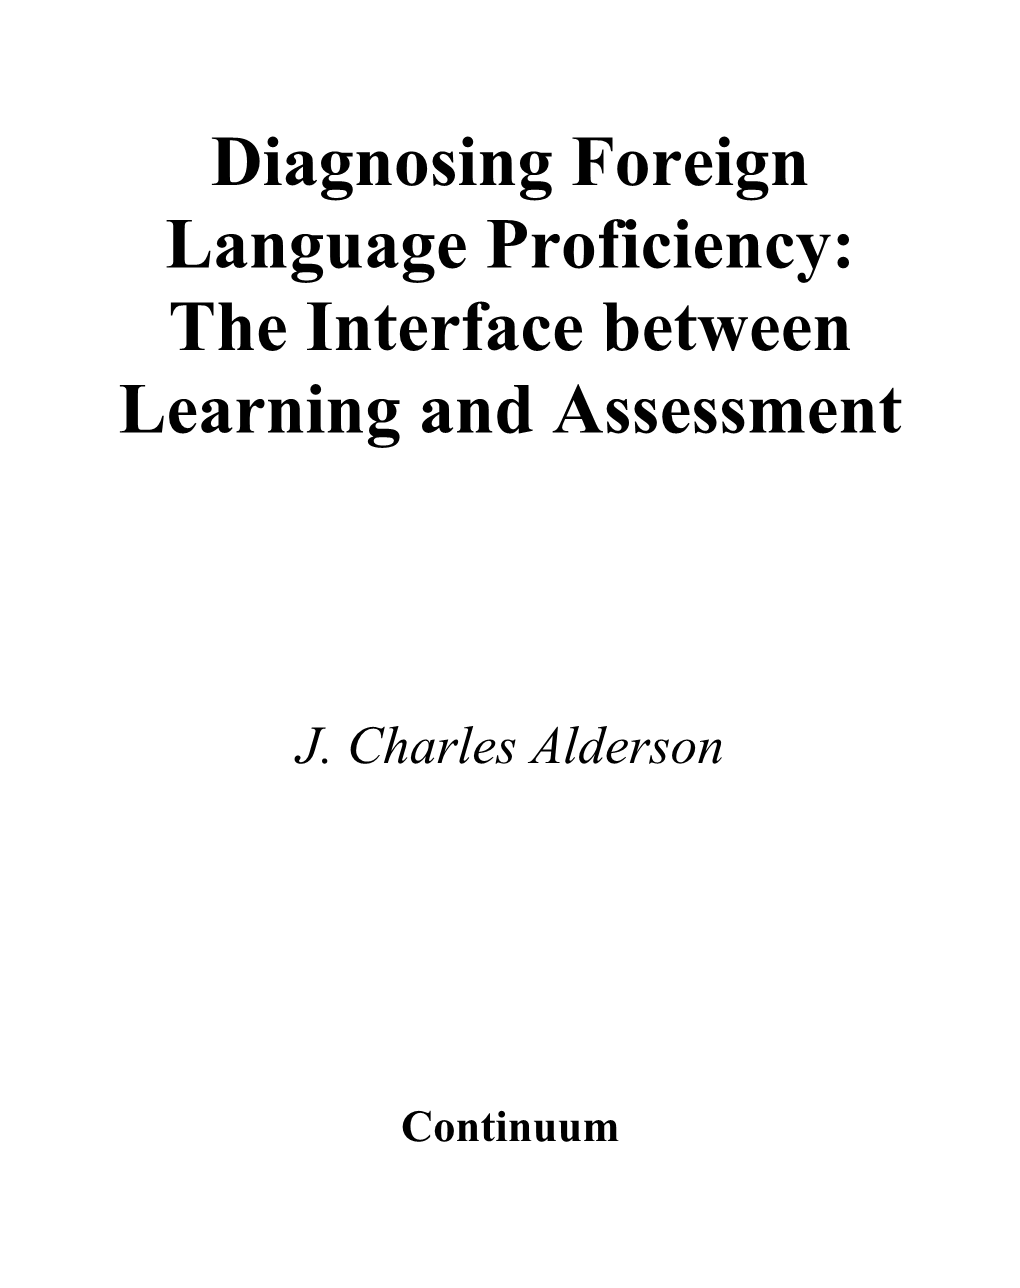 Diagnosing Foreign Language Proficiency: the Interface Between Learning and Assessment